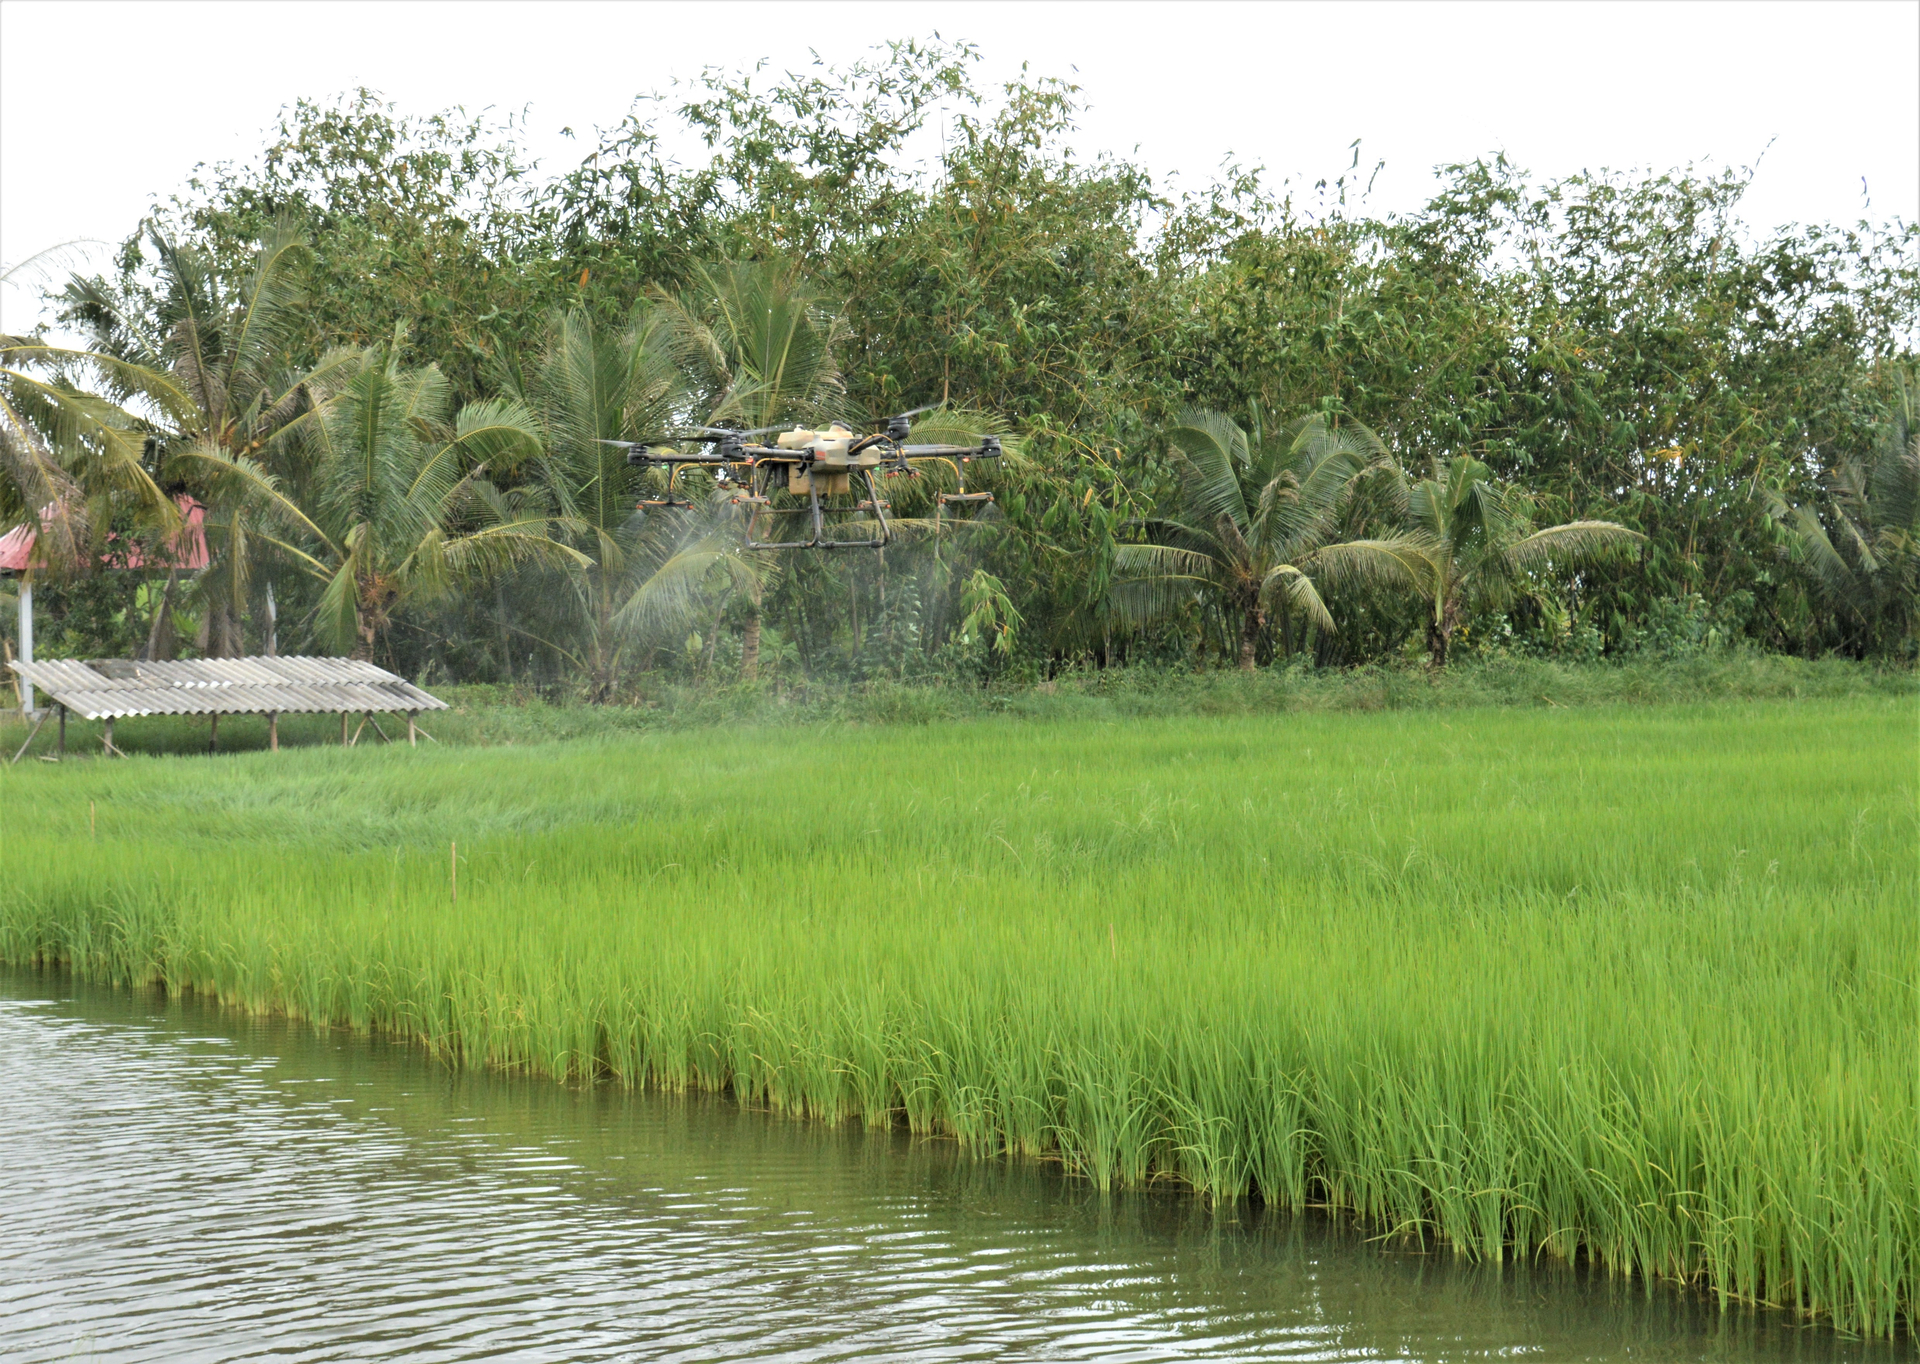 Kien Giang province boasts the largest rice-shrimp production area in the Mekong Delta region, which spans over 102,000 hectares. This vast expanse provides a highly favorable environment for meeting export standards, with a focus on organic rice production. Photo: Trung Chanh.